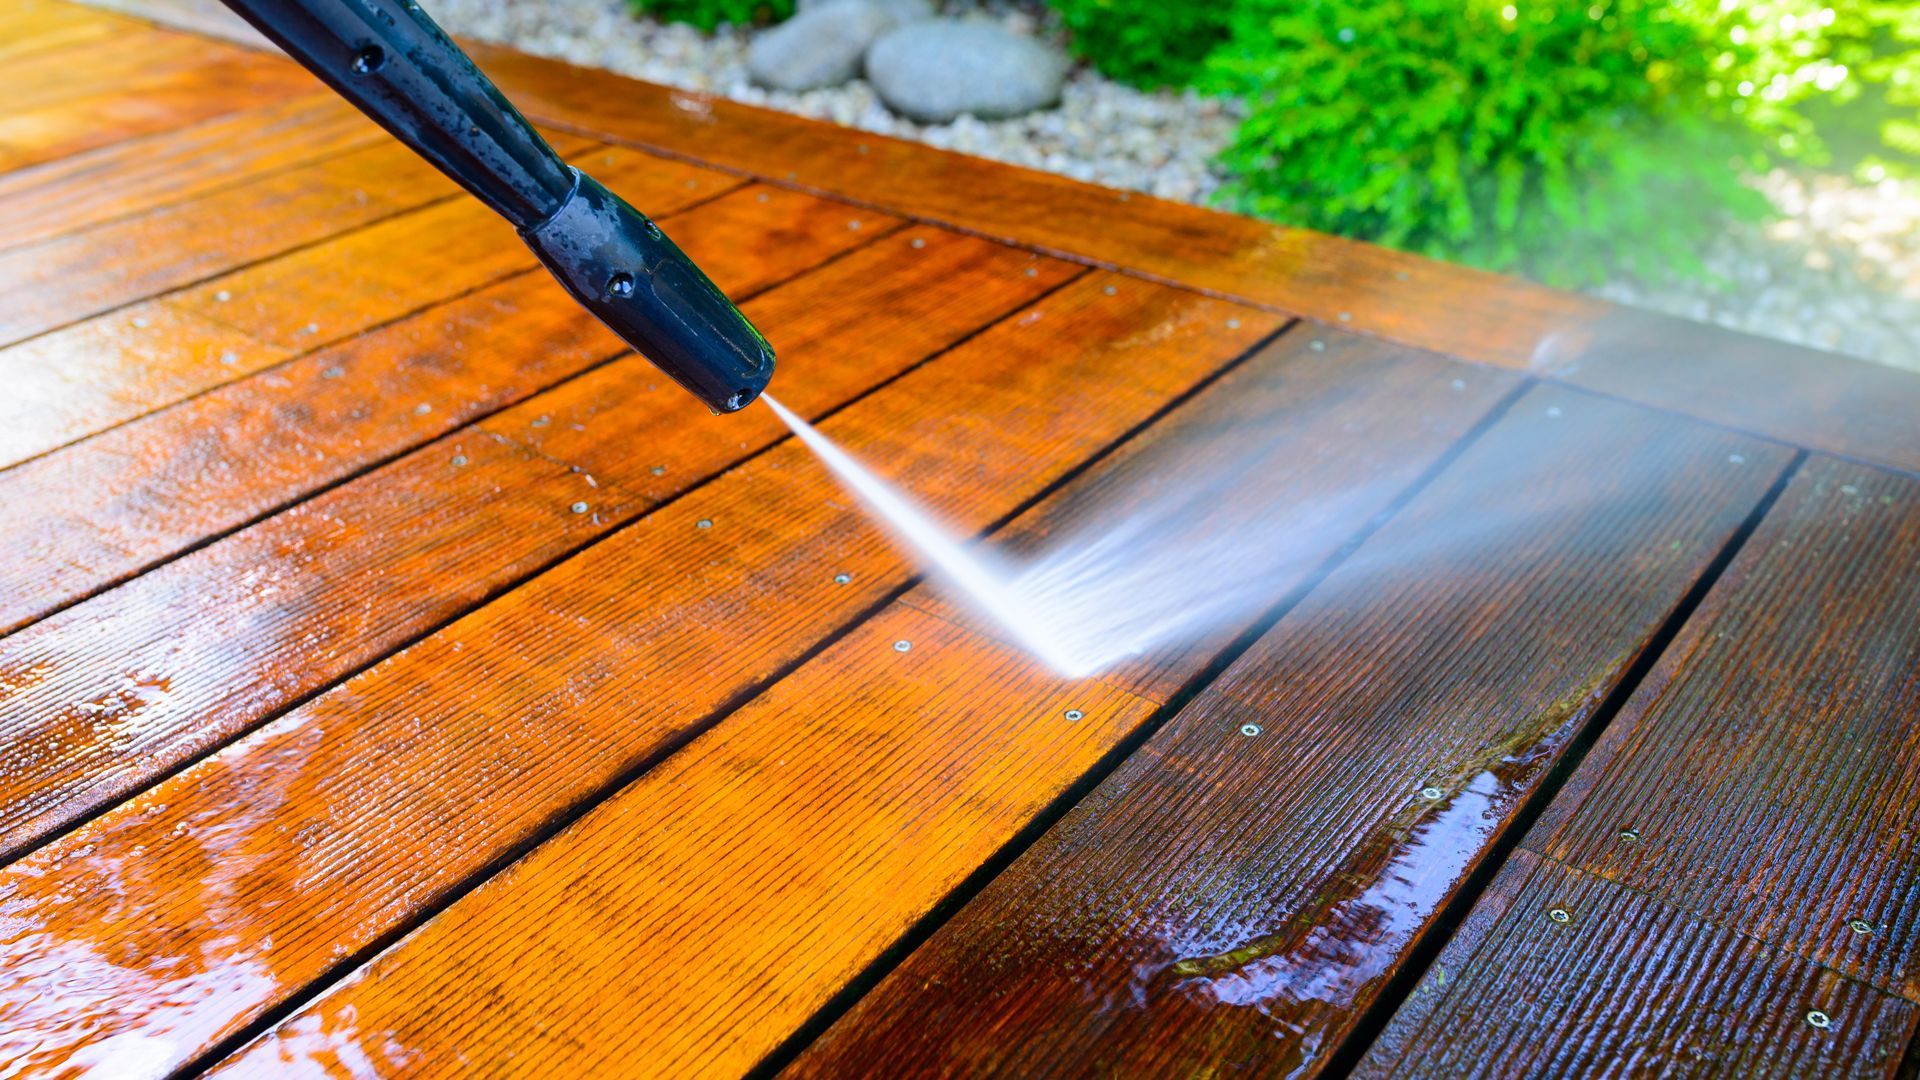 a person is using a high pressure washer to clean a wooden deck